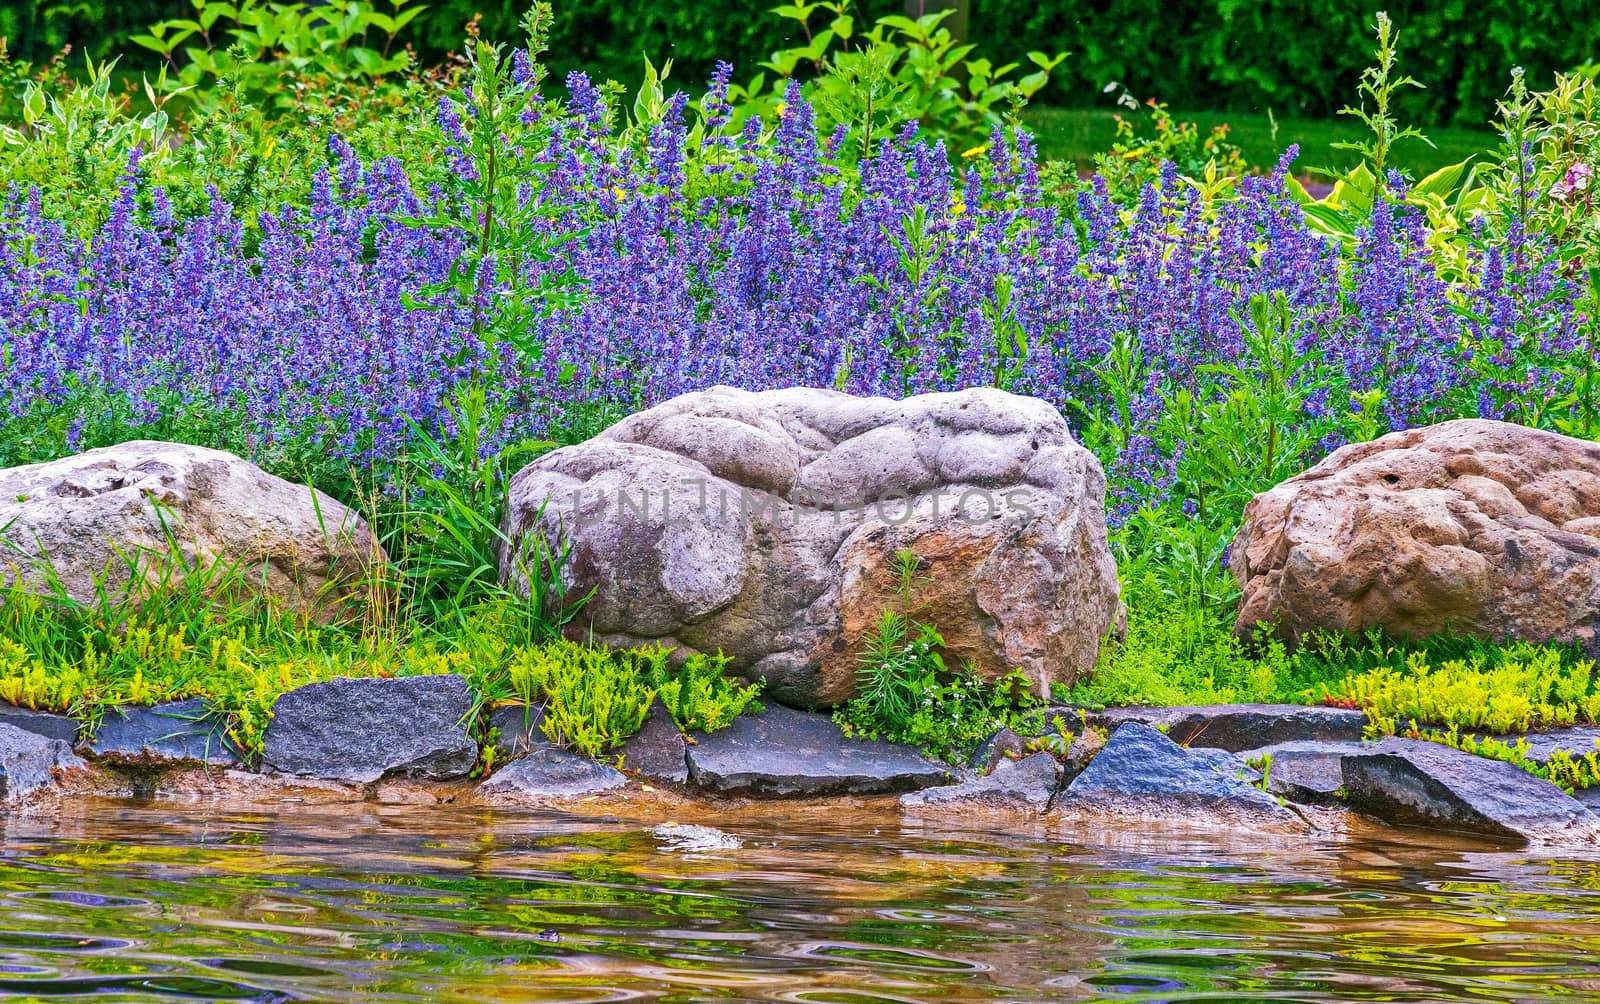 A small transparent river is washed by large stone boulders against the background of wild wildflowers by Adamchuk